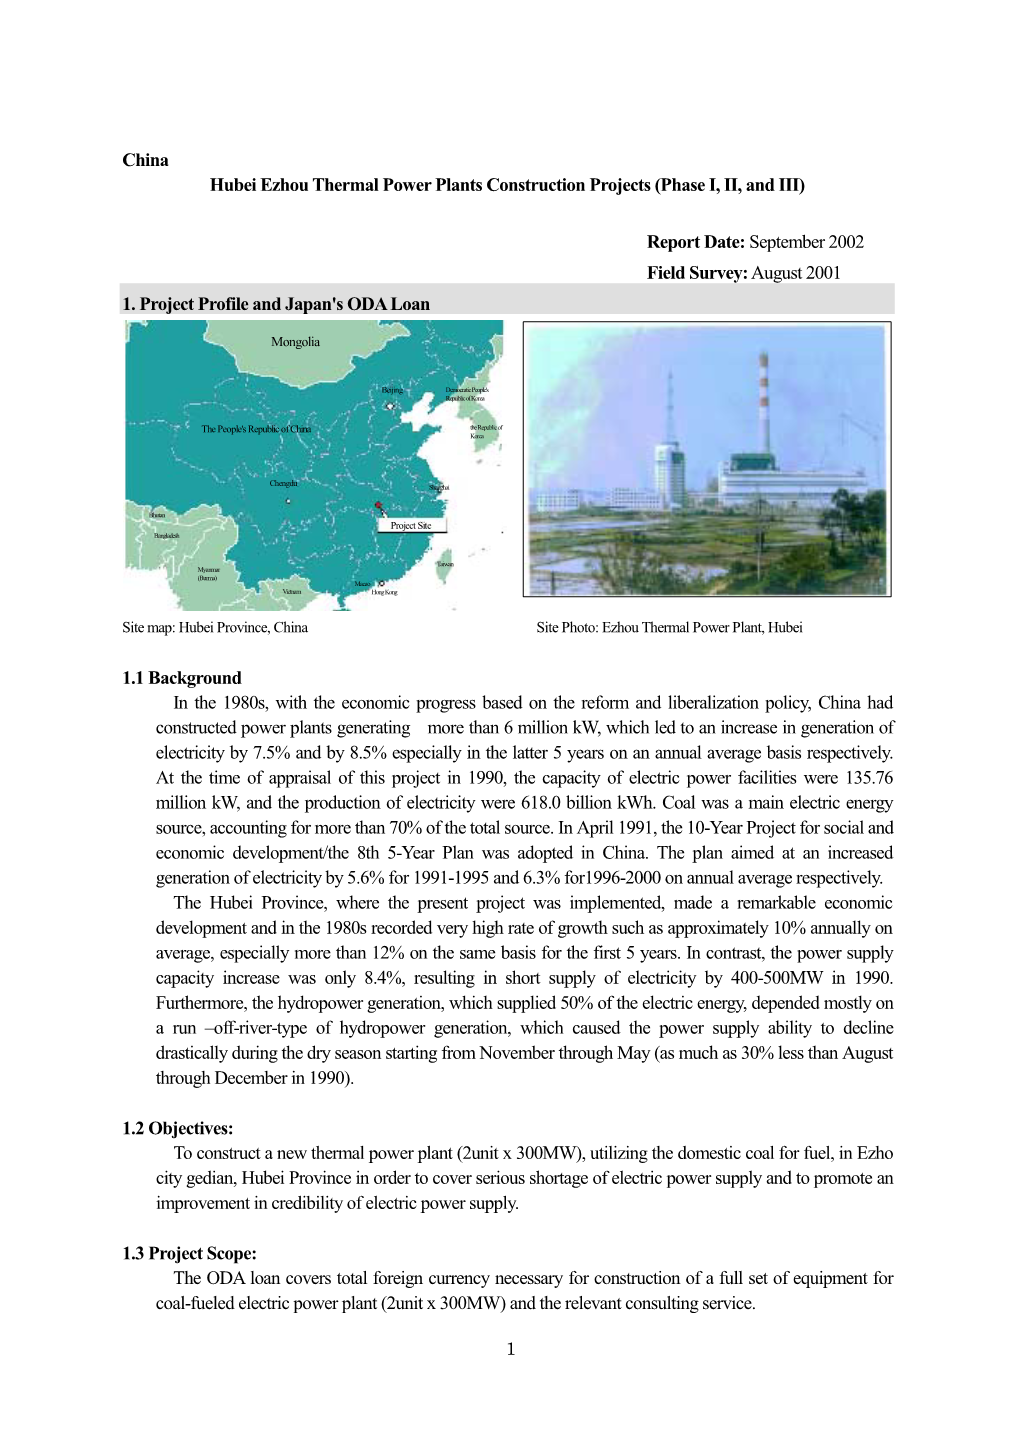 China Hubei Ezhou Thermal Power Plants Construction Projects (Phase I, II, and III)